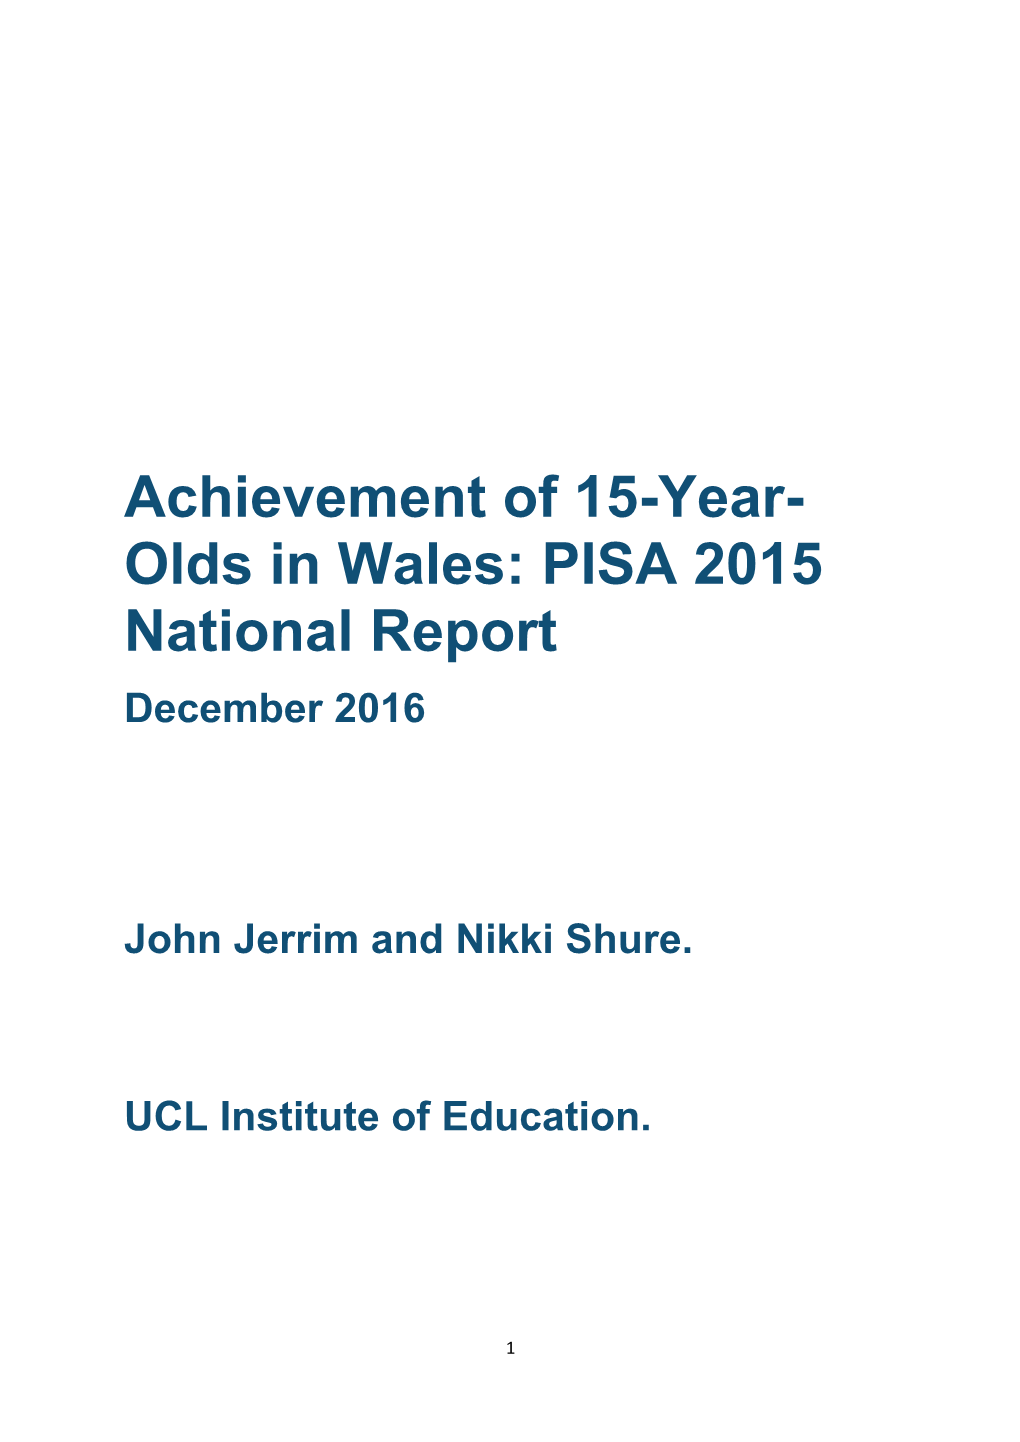 Achievement of 15-Year- Olds in Wales: PISA 2015 National Report December 2016